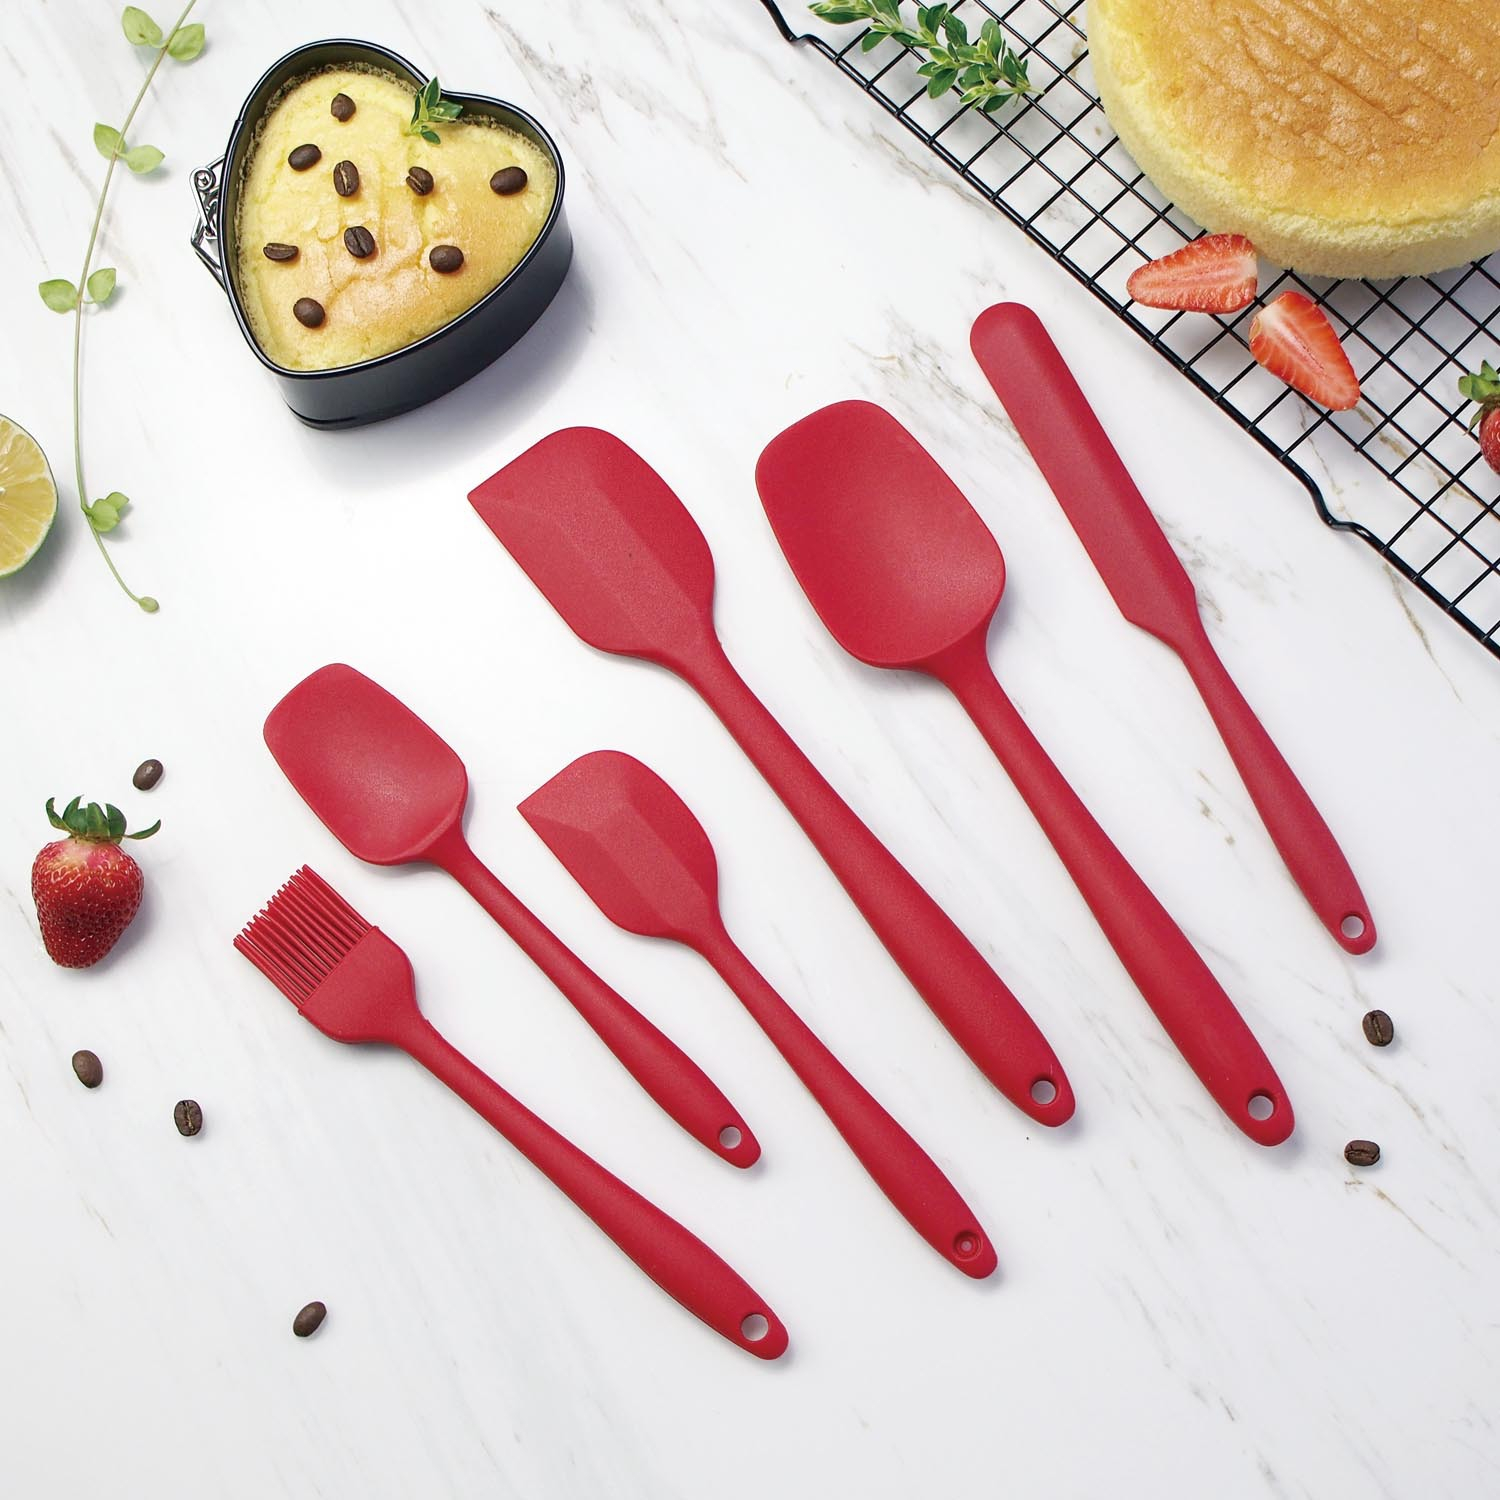 Heat Resistant Kitchen Utensils Long Handled Non Stick Baking Pastry Silicone Spatula Set